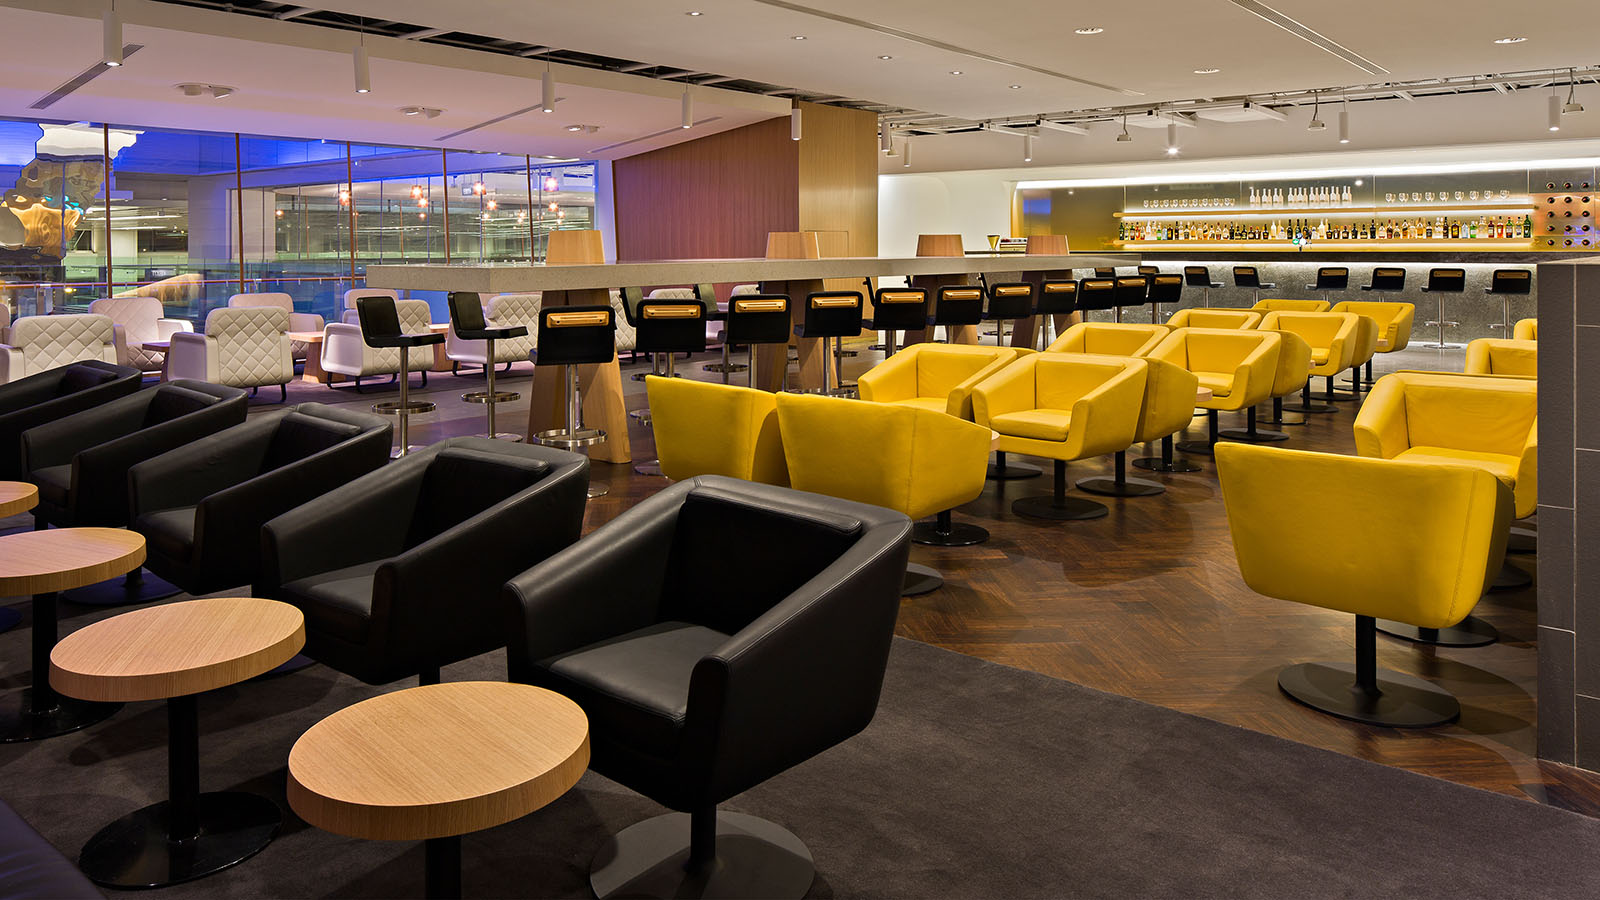 Black and yellow coloured seats at the Qantas International Business Lounge in Singapore